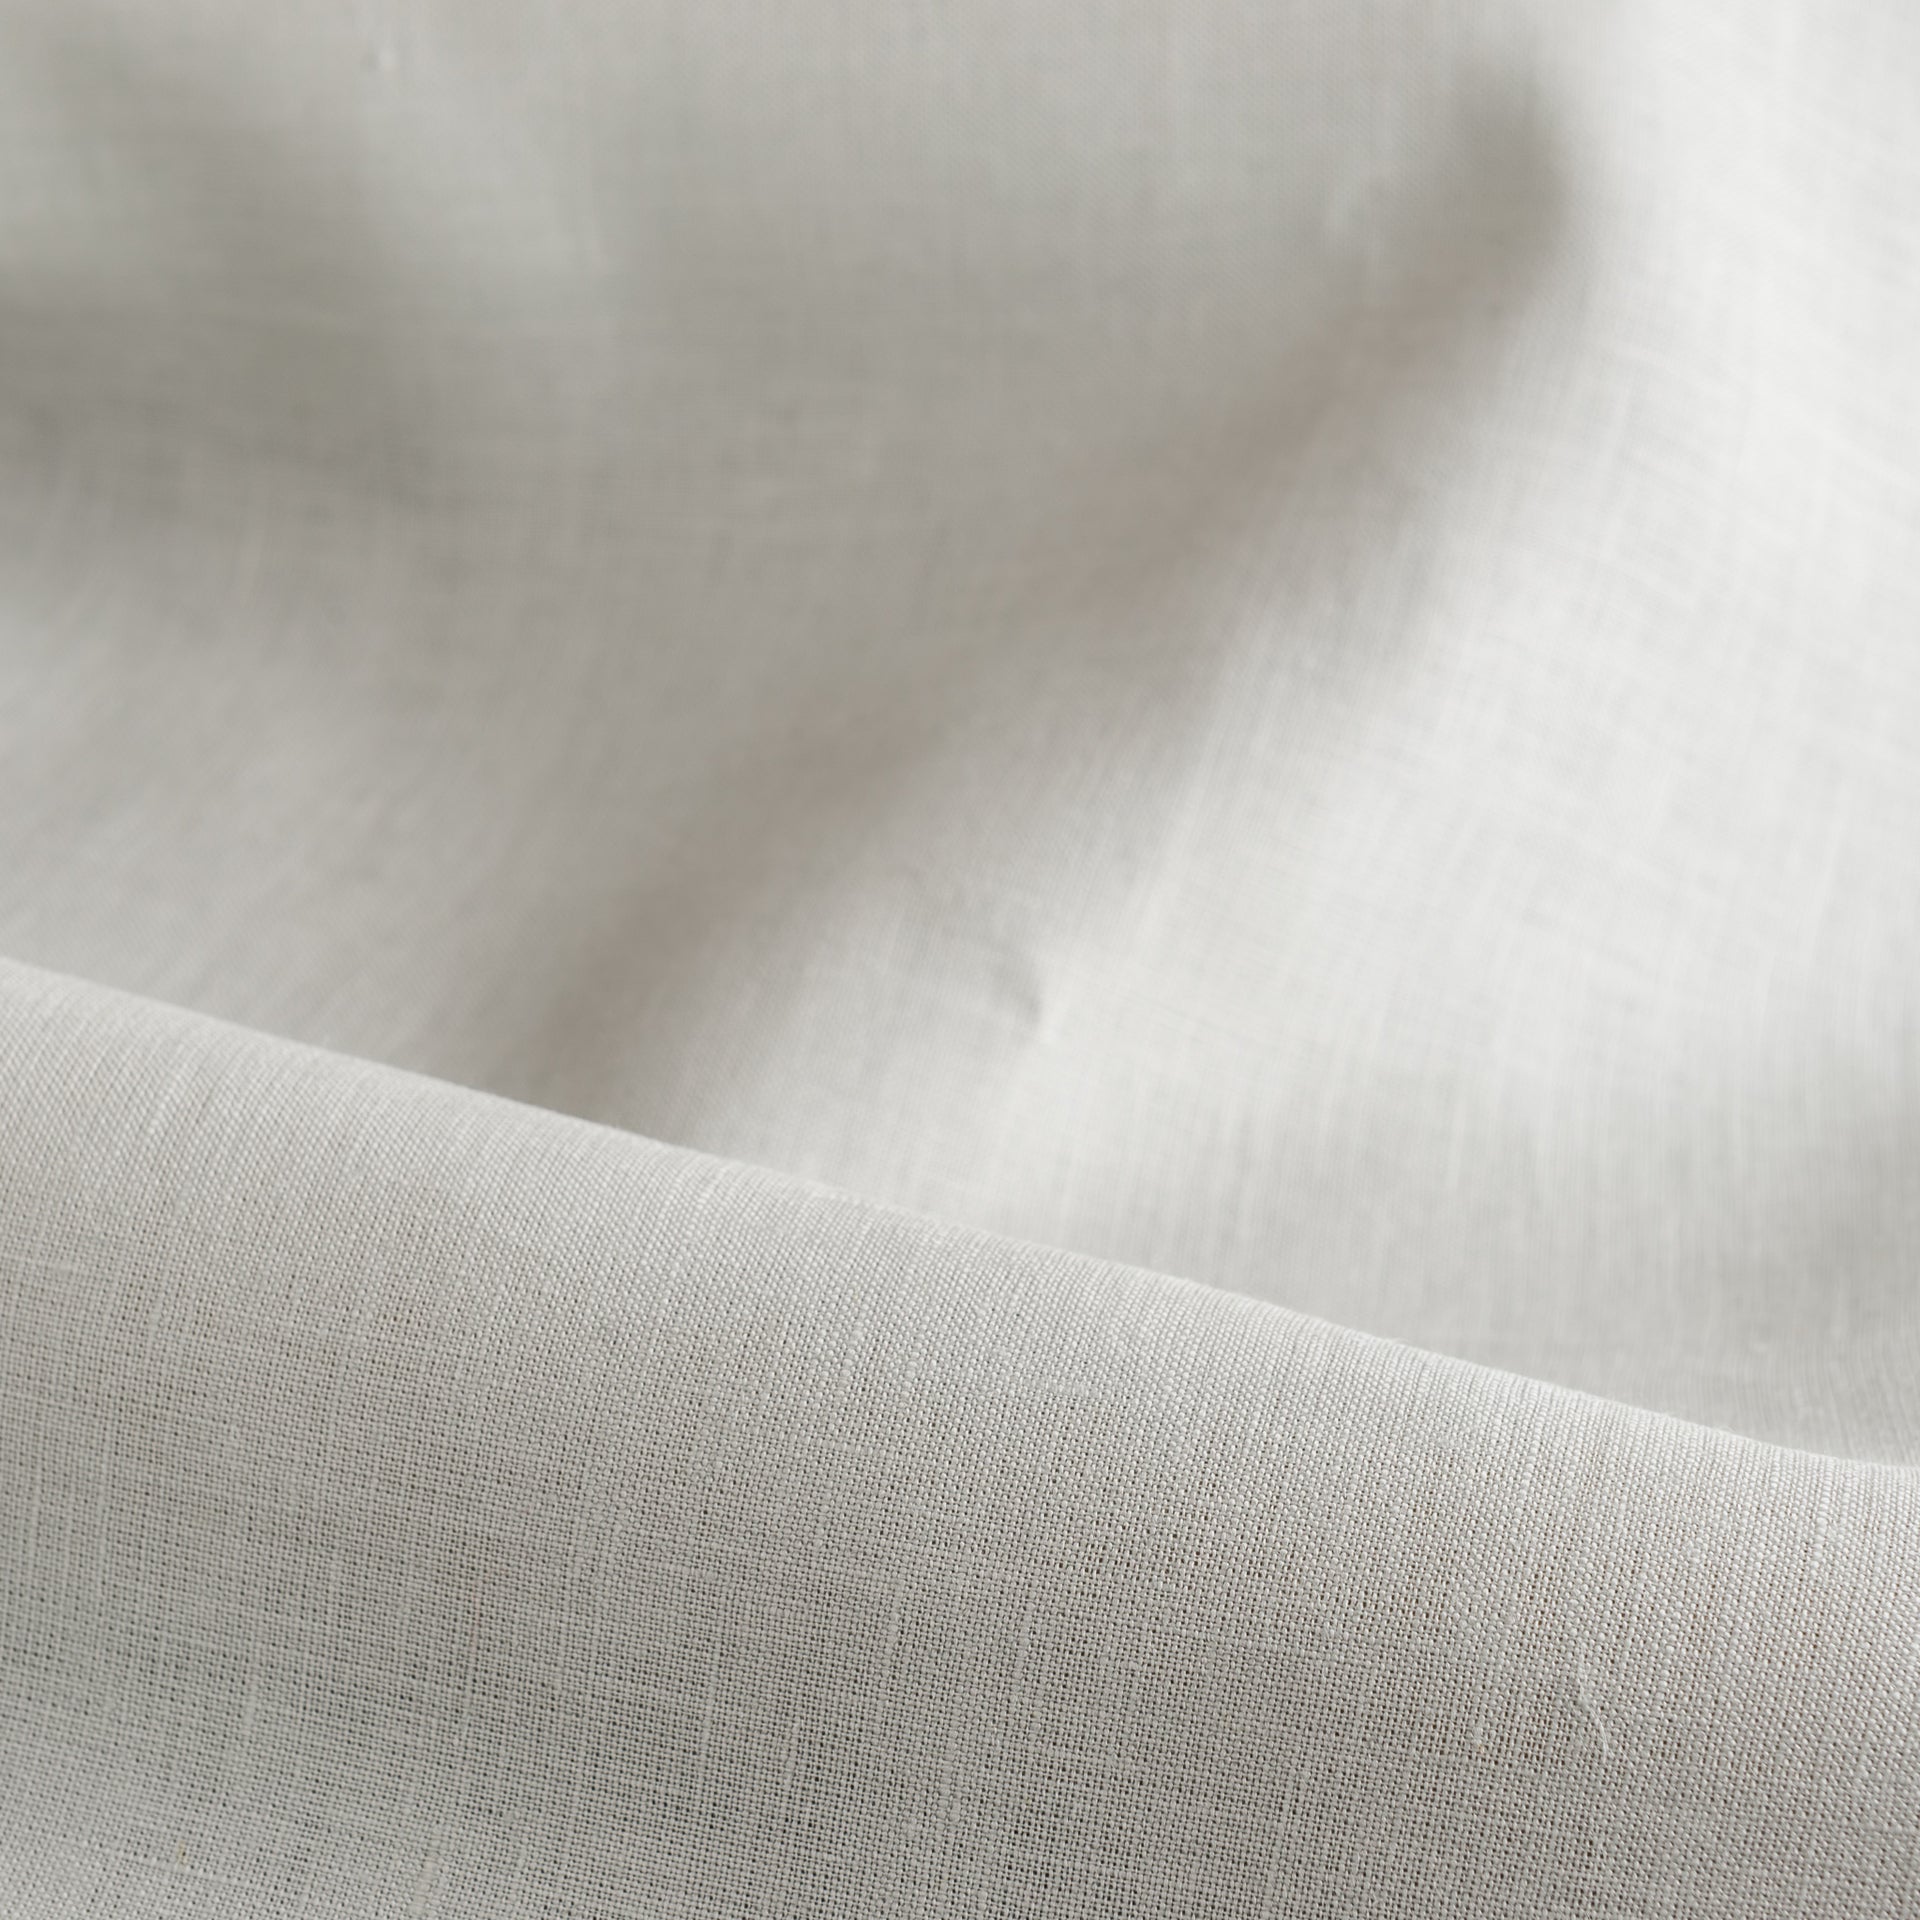 Stone Grey Linen Fabric by the Yard - 100% French Natural - Width 52”- 106”